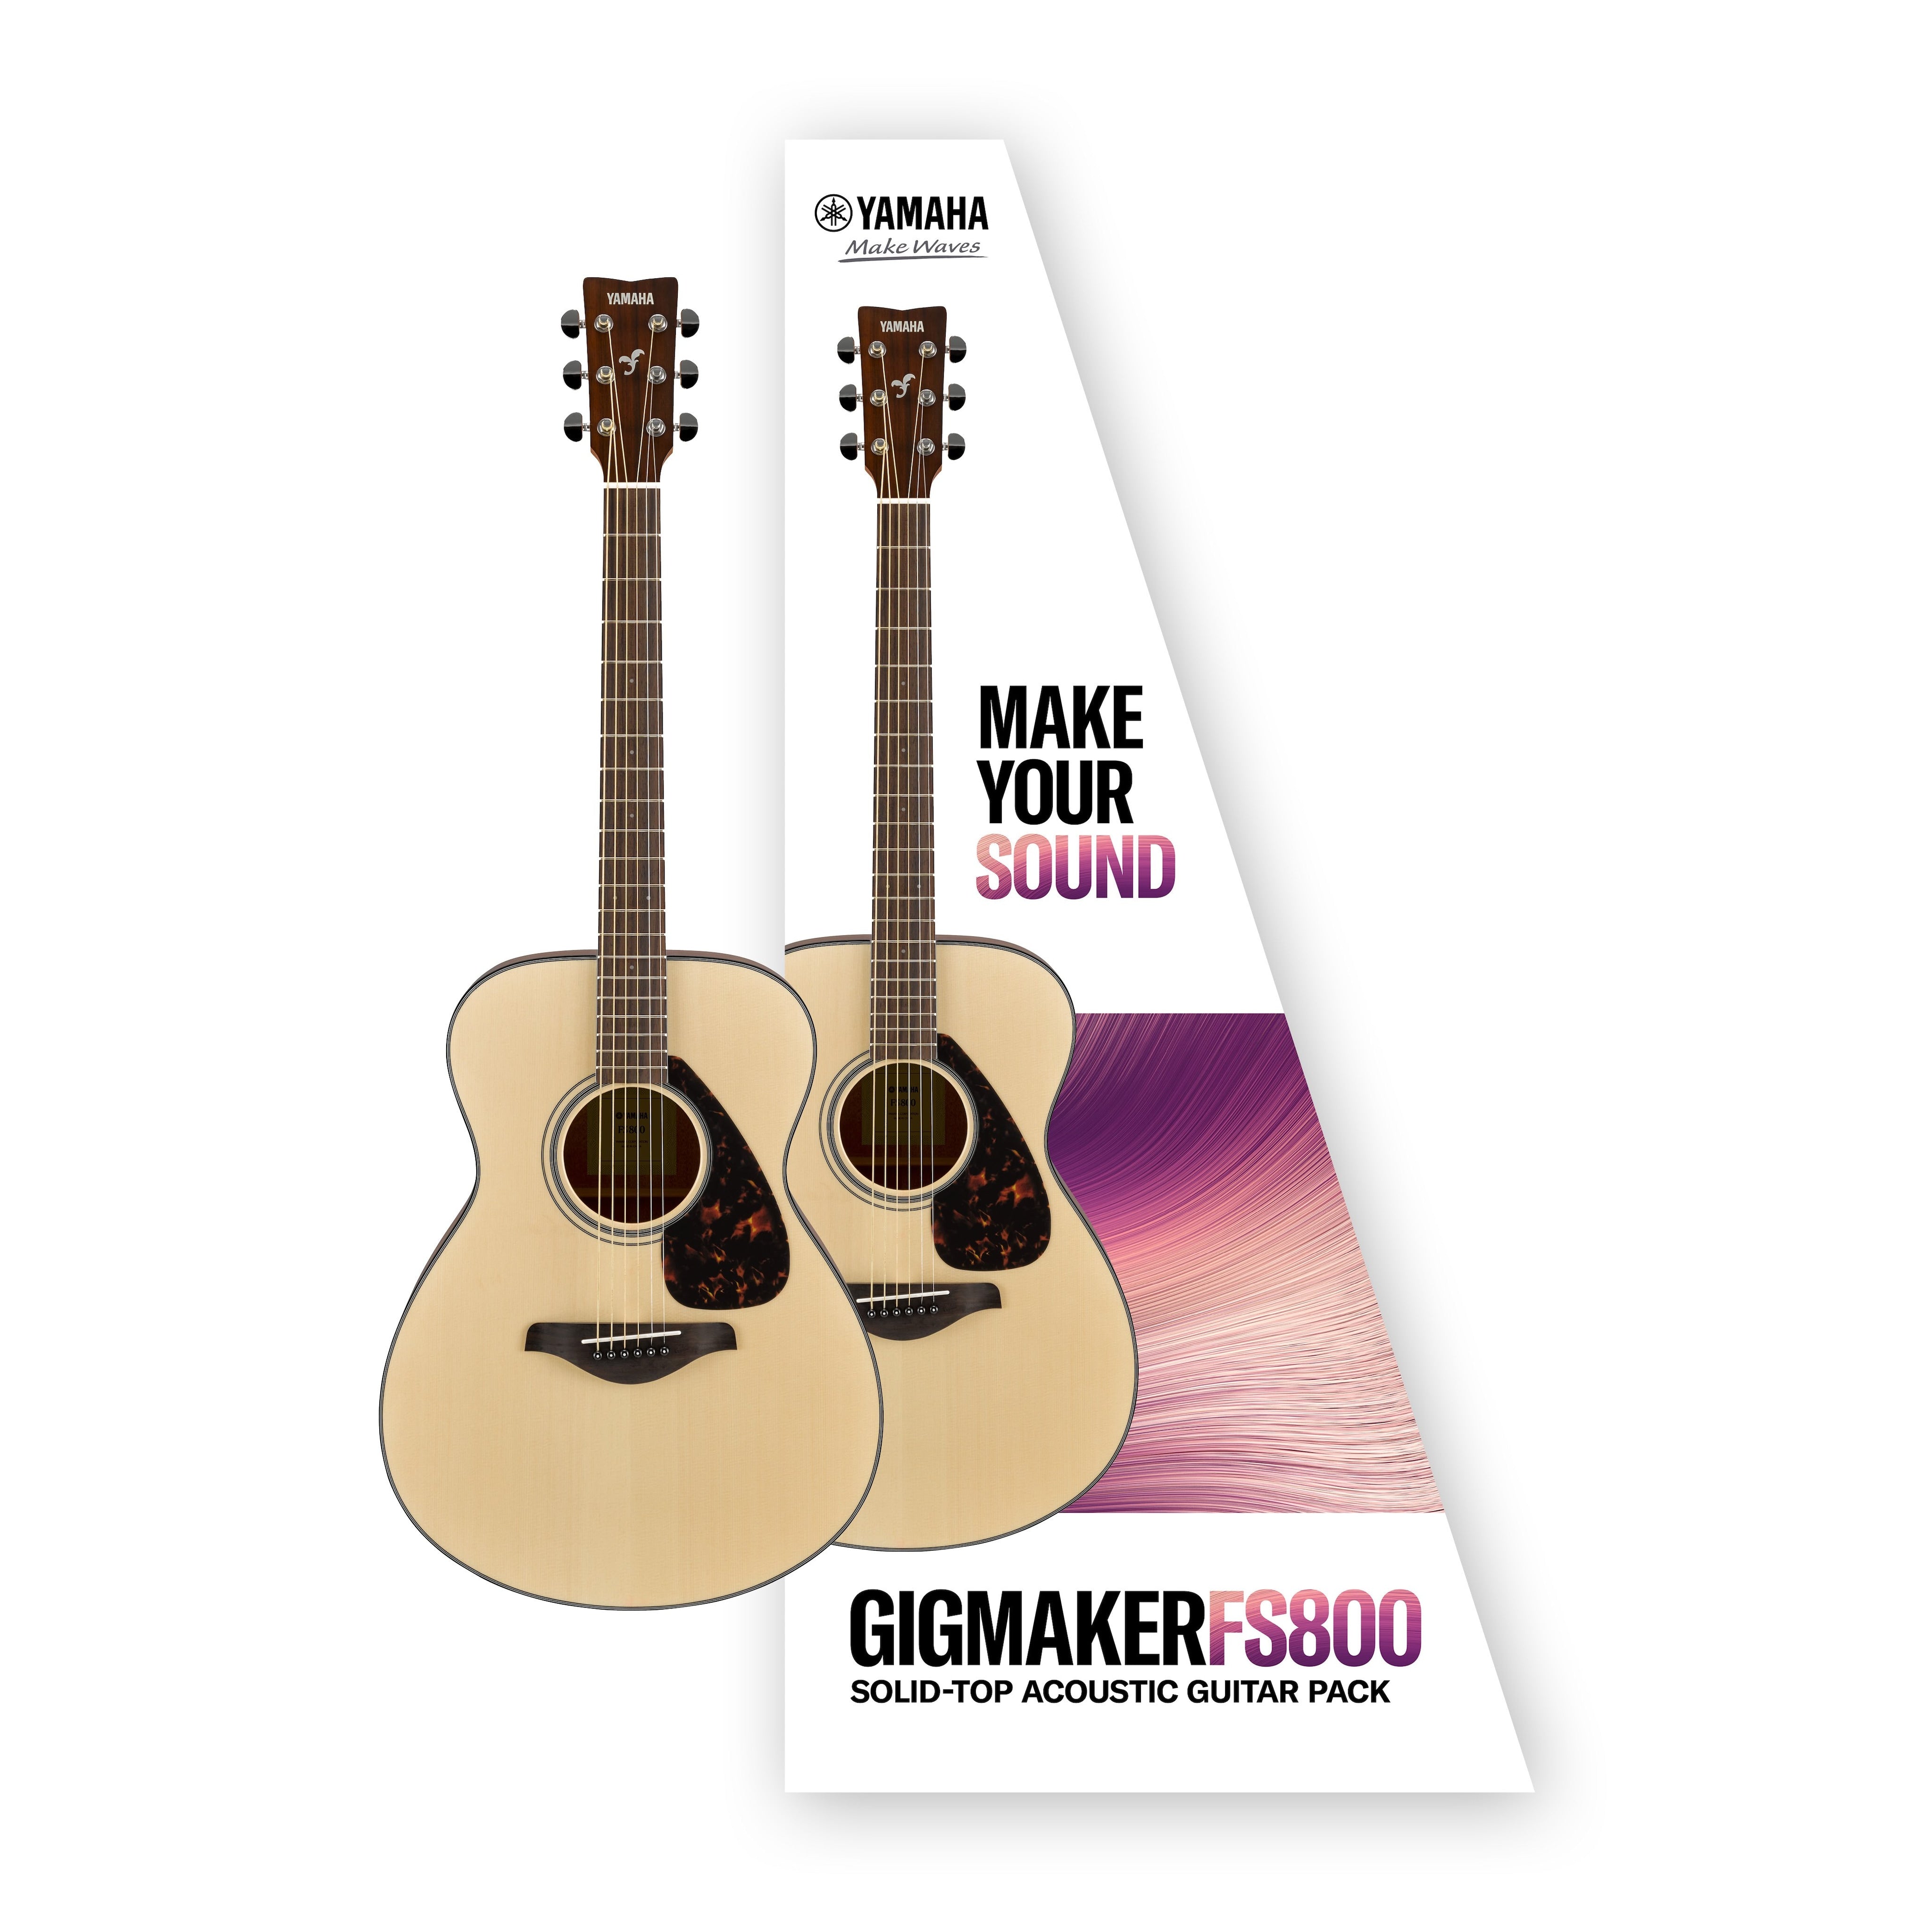 Yamaha GIGMAKER FS800 Acoustic Guitar Pack